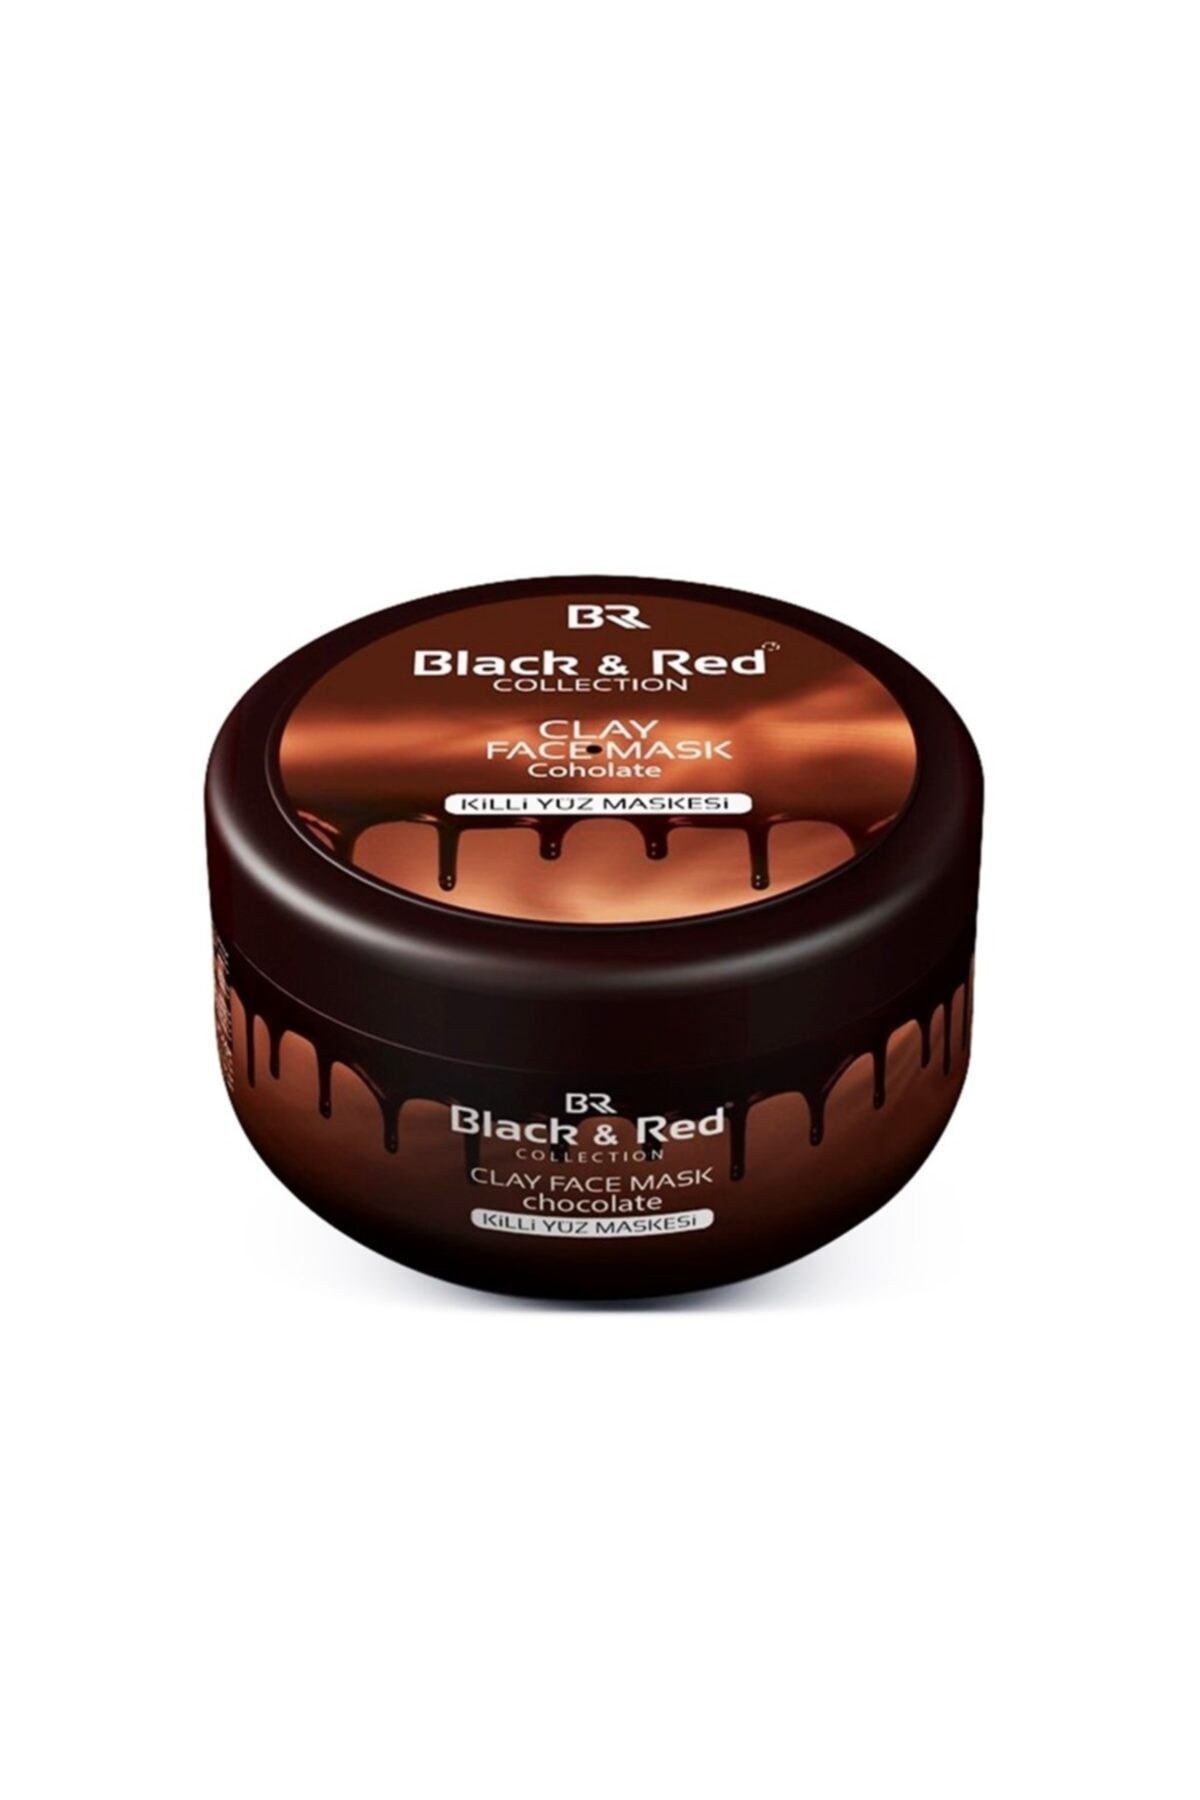 Black Red Black&red Clay Face Mask Chocolate